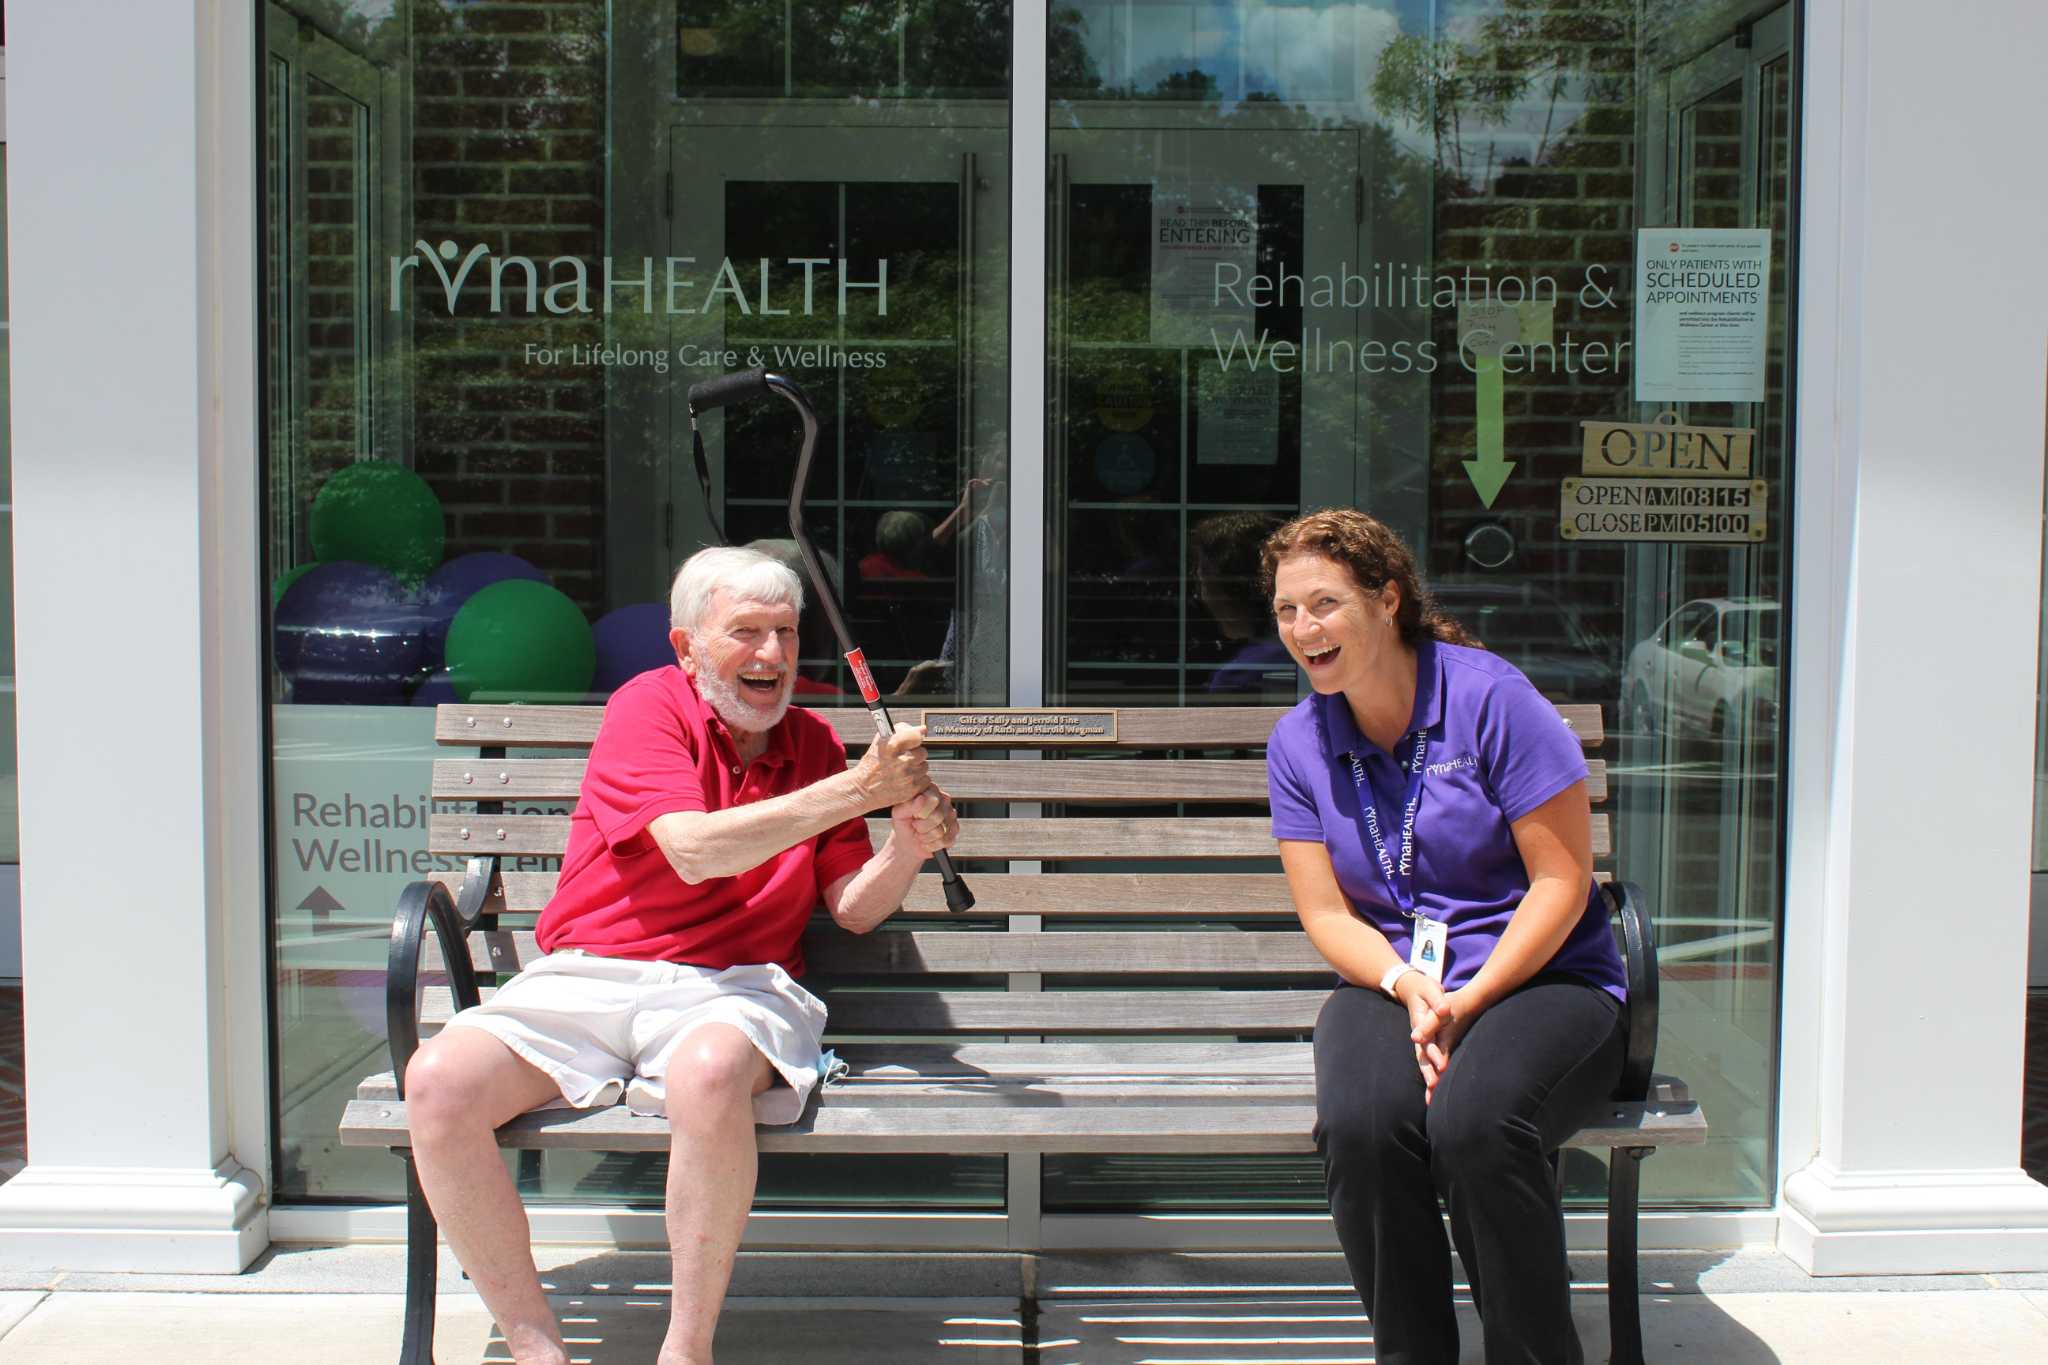 RVNAhealth physical therapists ‘widely beloved’ by patients